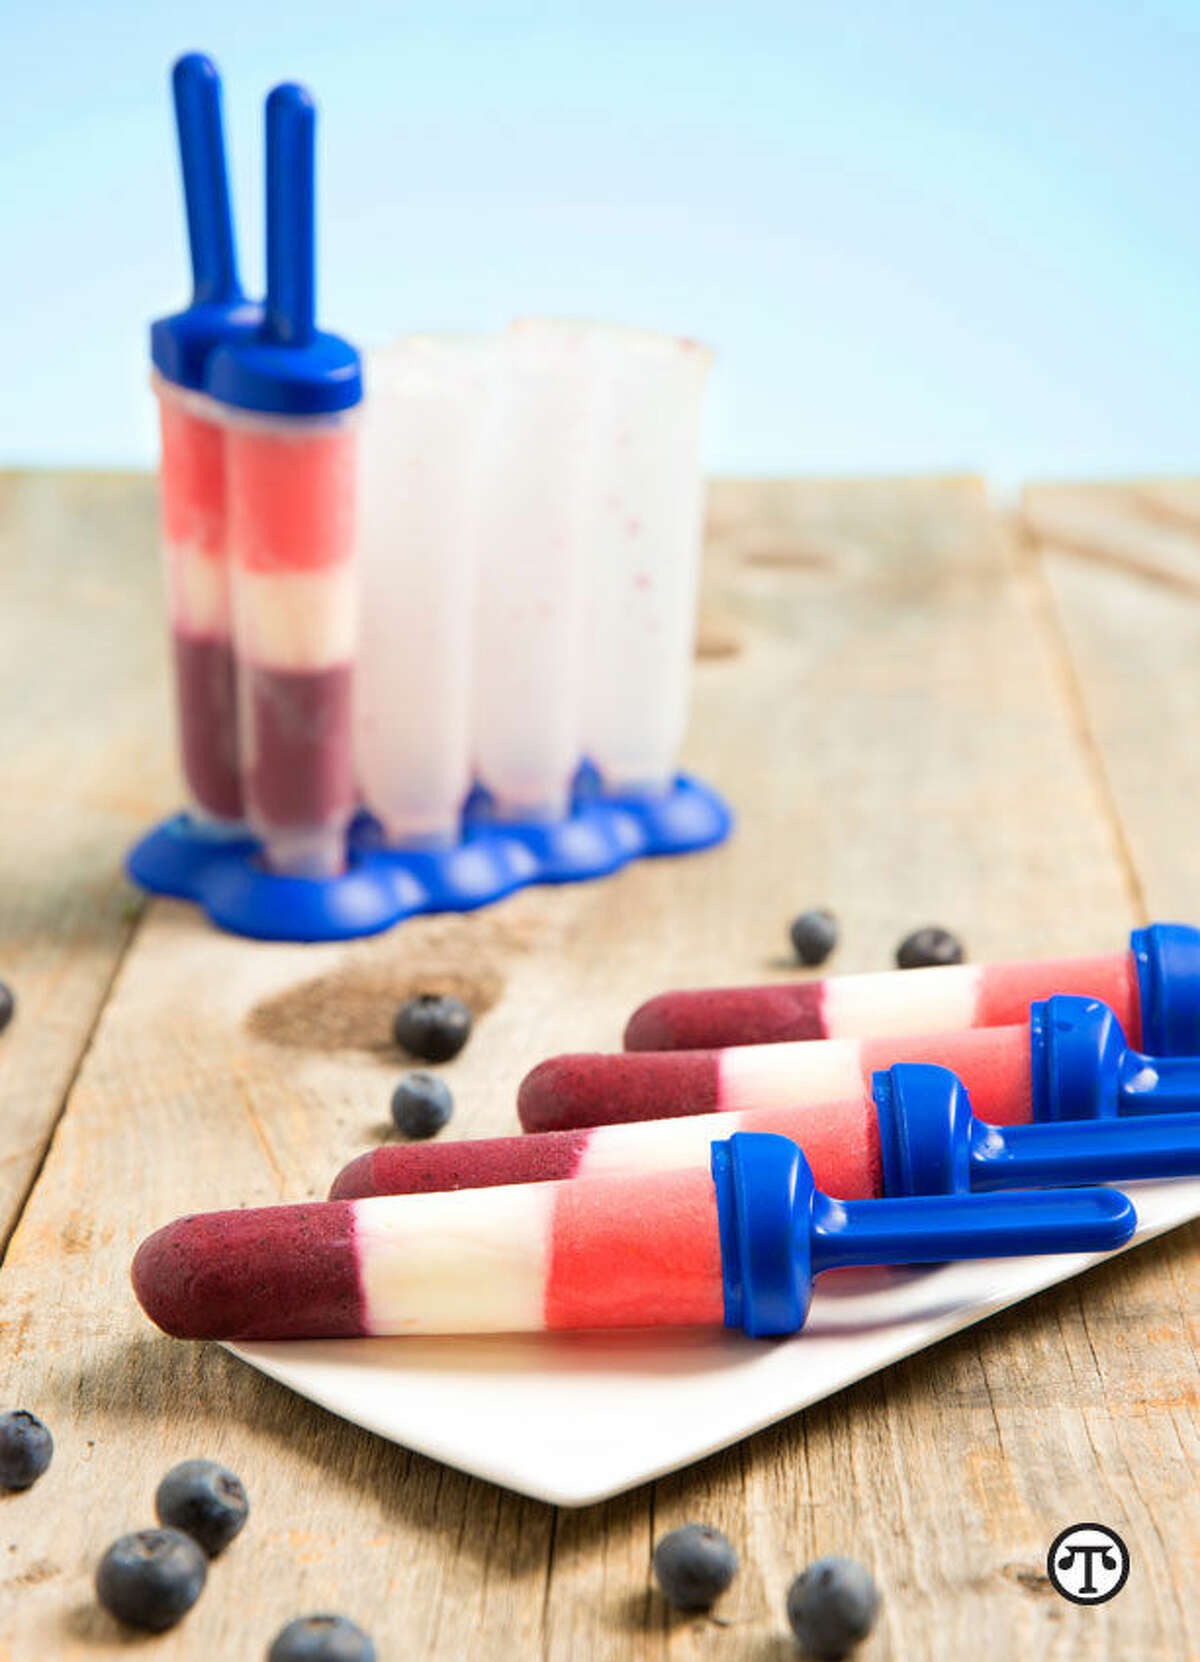 Positive memories of family activities and healthful foods such as blueberries, as in these Red, White and Blueberry Popsicles, can set kids on a positive path toward good choices that last a lifetime. (NAPS)